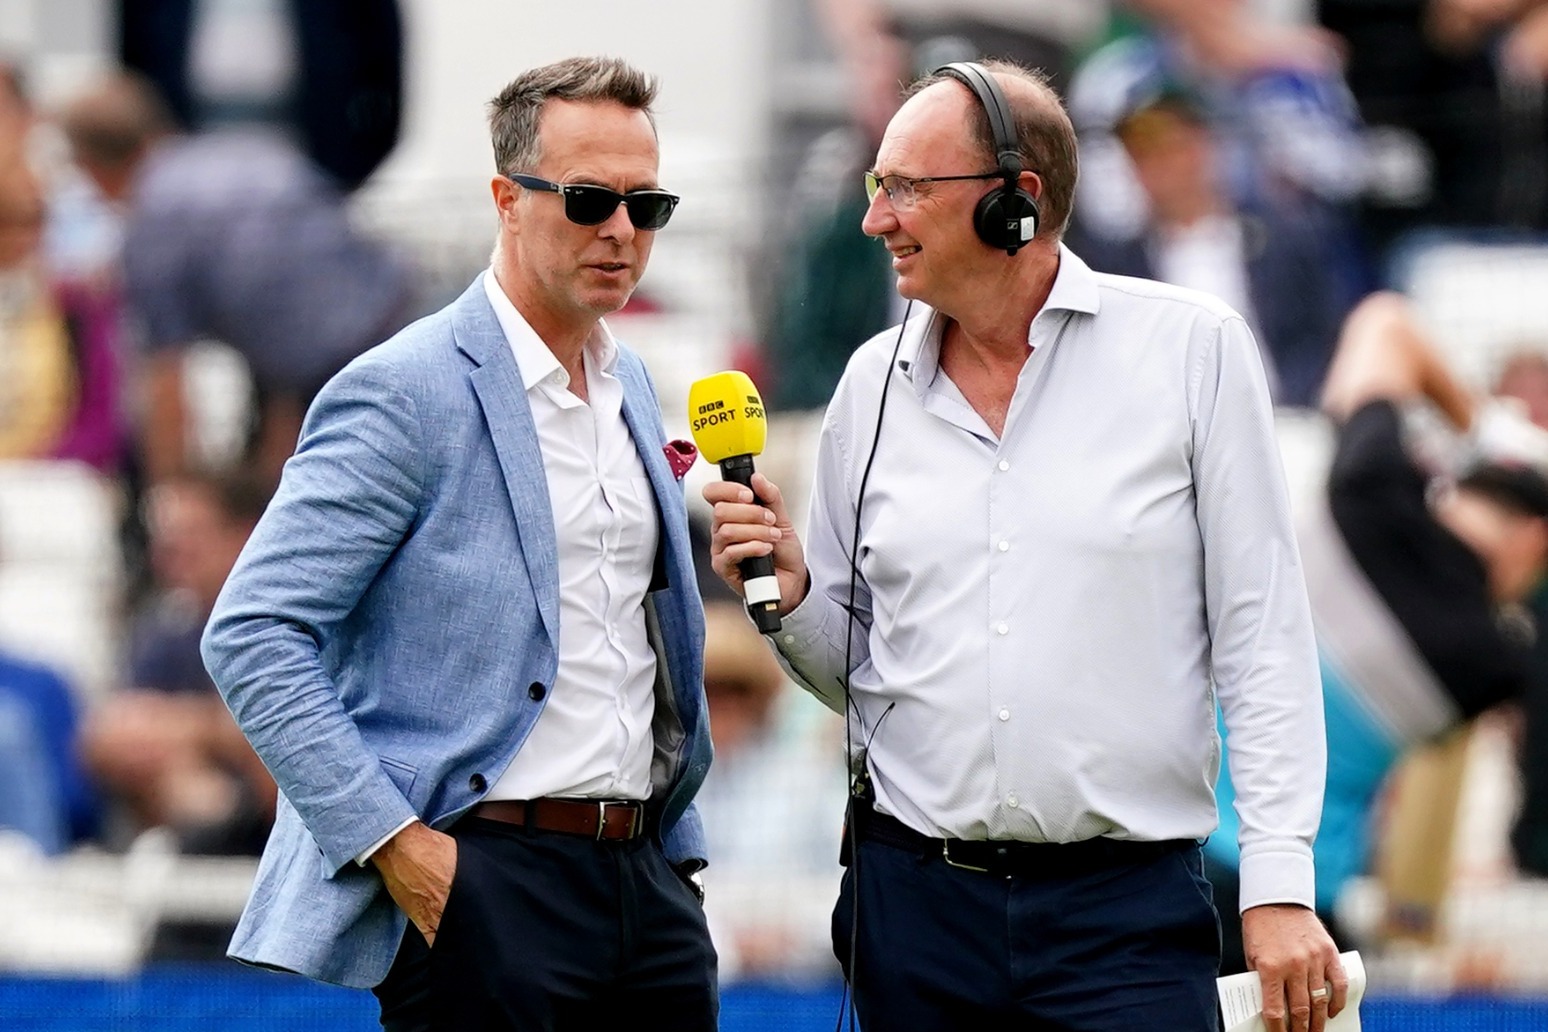 Michael Vaughan faces wait over BBC future after he is cleared in racism hearing 